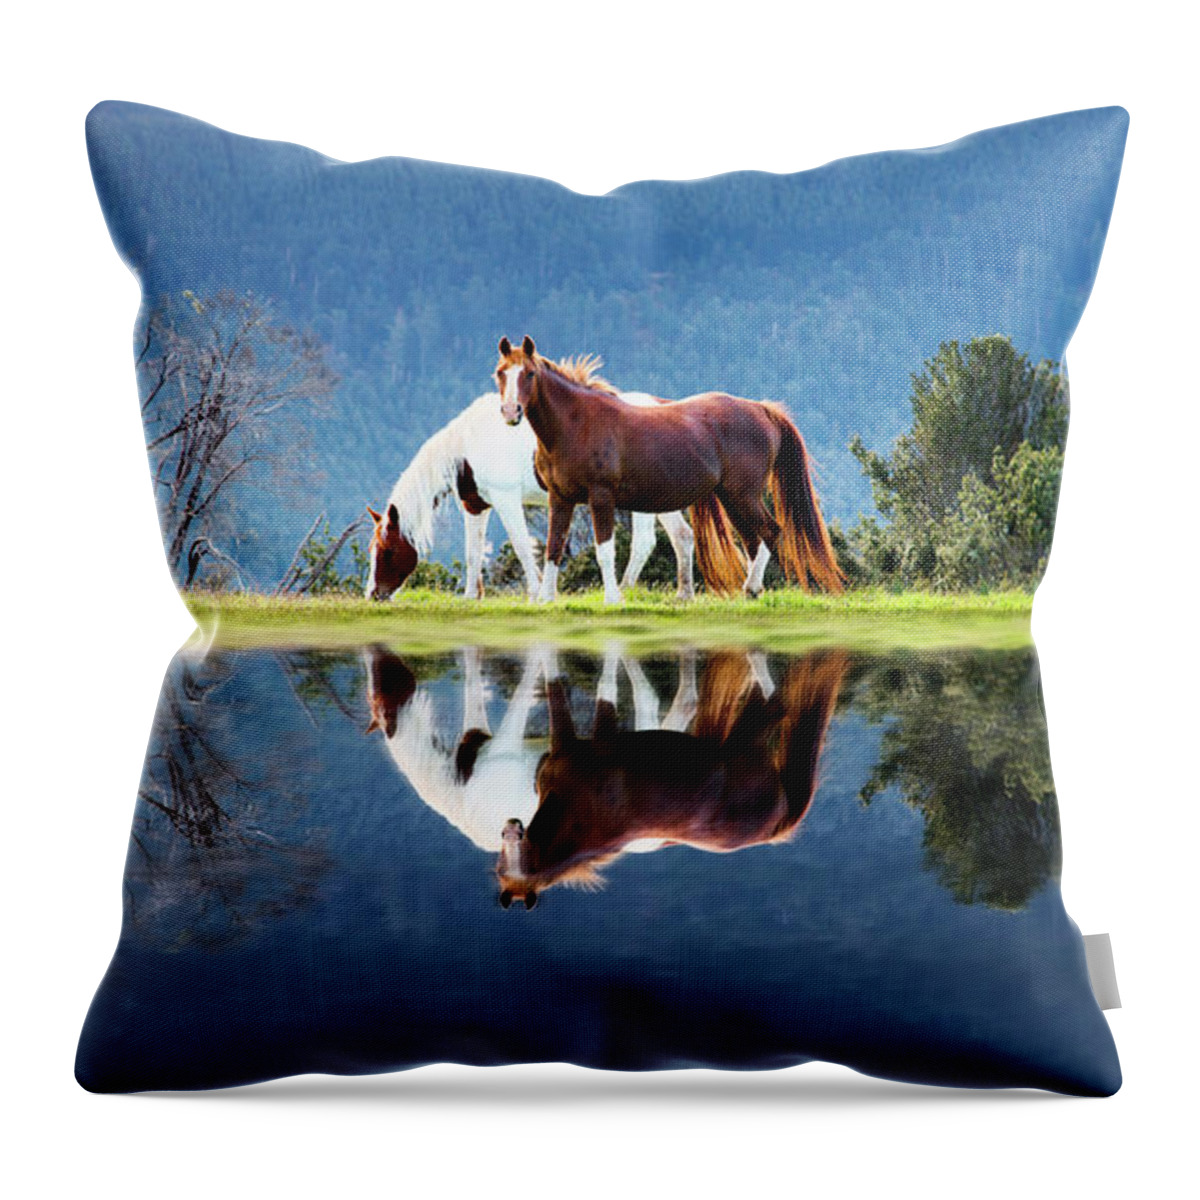 Horse Throw Pillow featuring the photograph Love - Reflection by Atomiczen